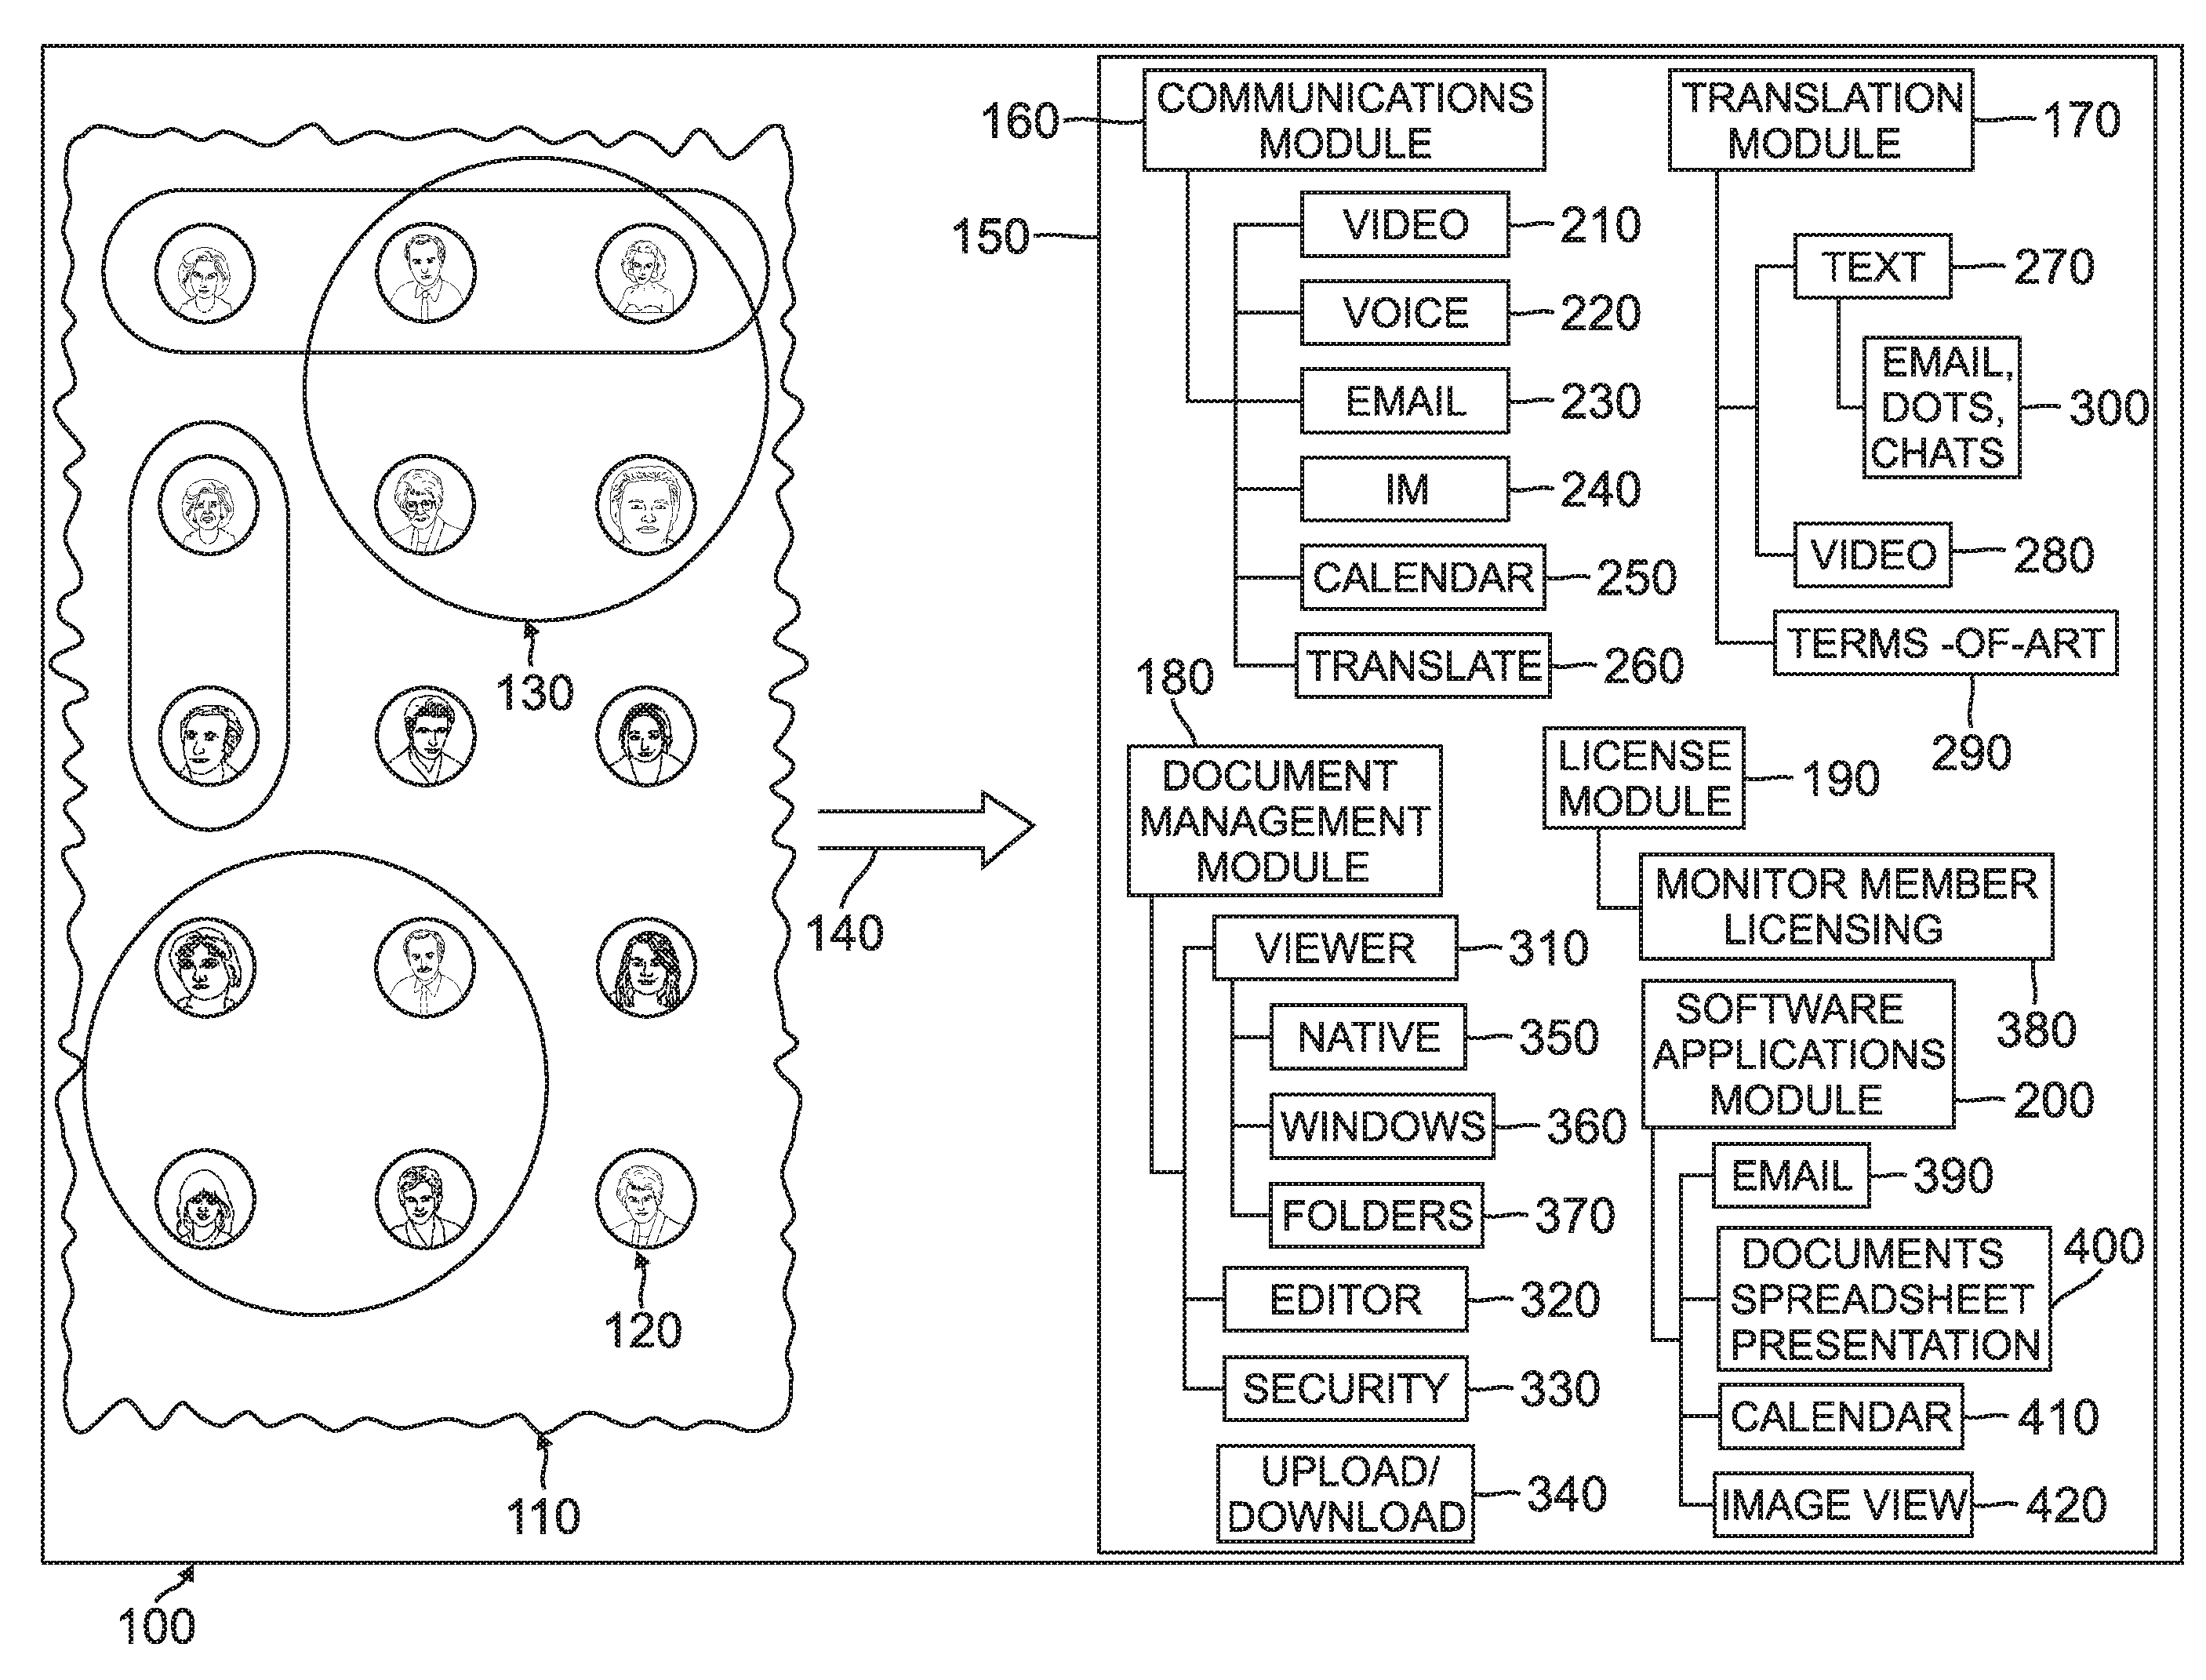 Method for automatically associating contacts in an online social network